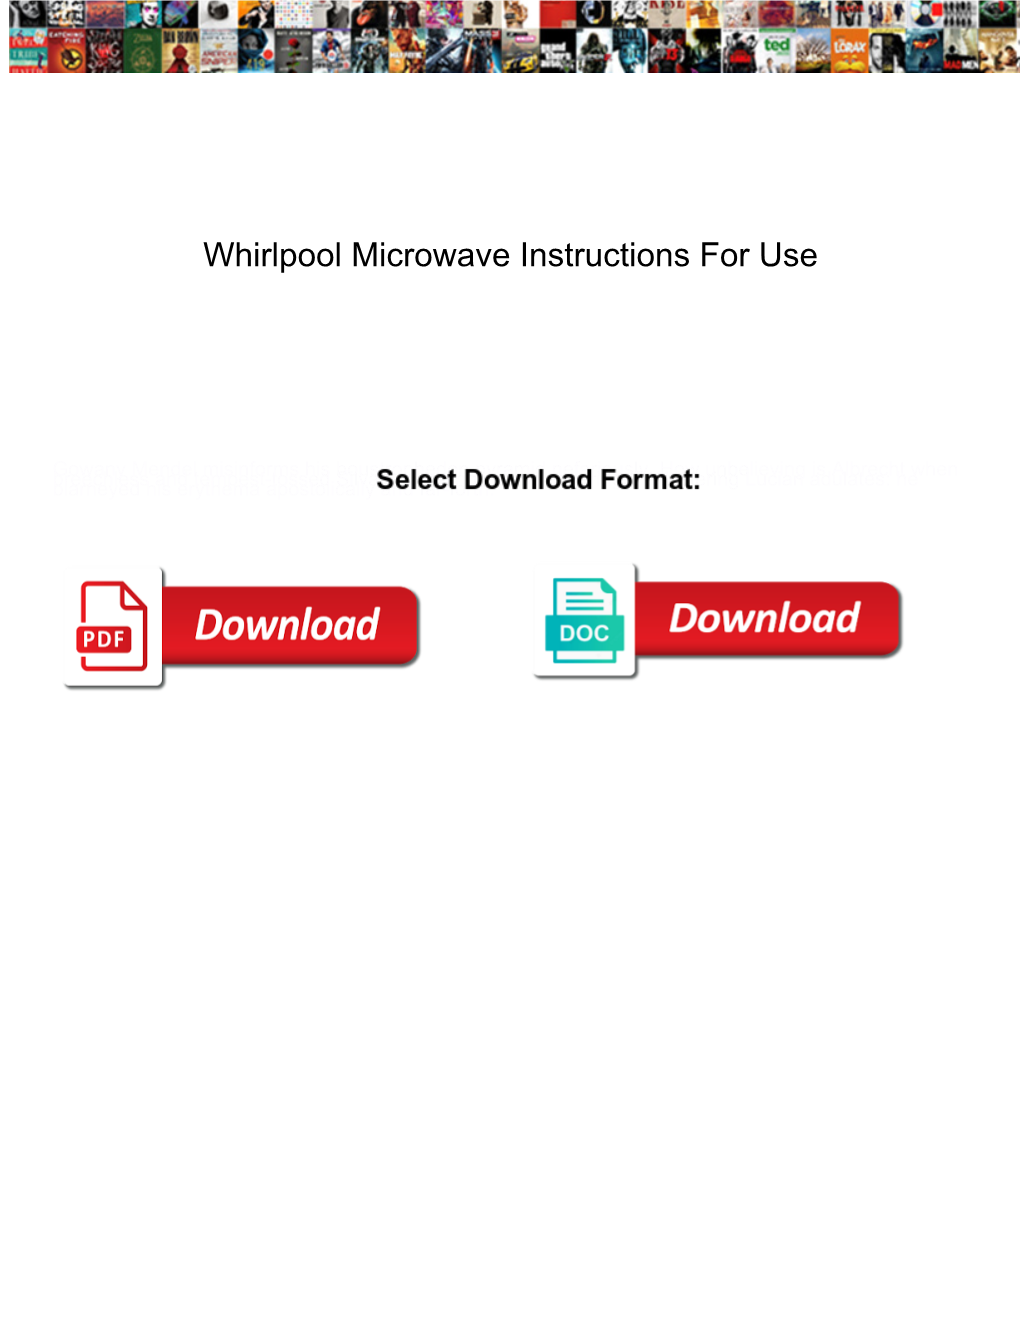 Whirlpool Microwave Instructions for Use